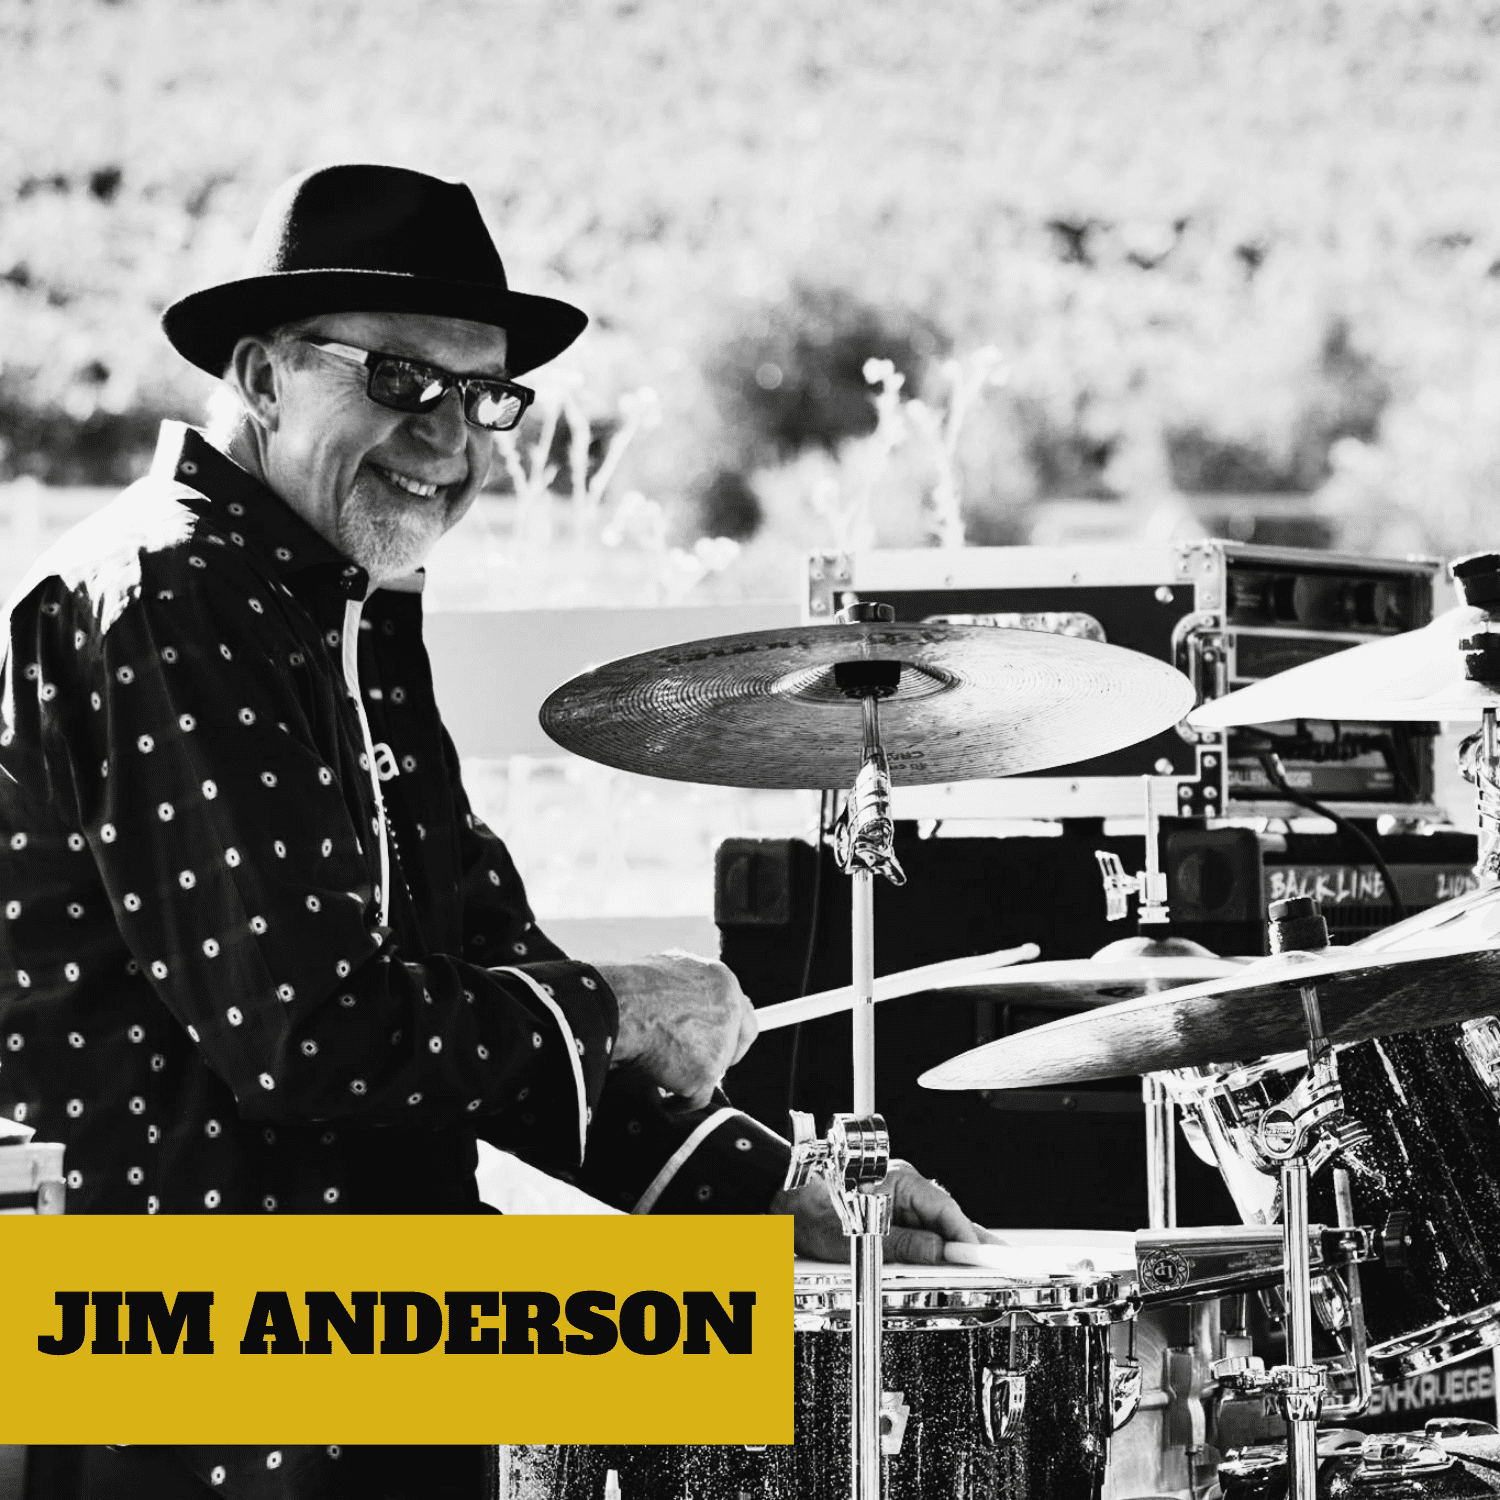 JIM ANDERSON of the Blues Rock band Jennifer Lyn & The Groove Revival